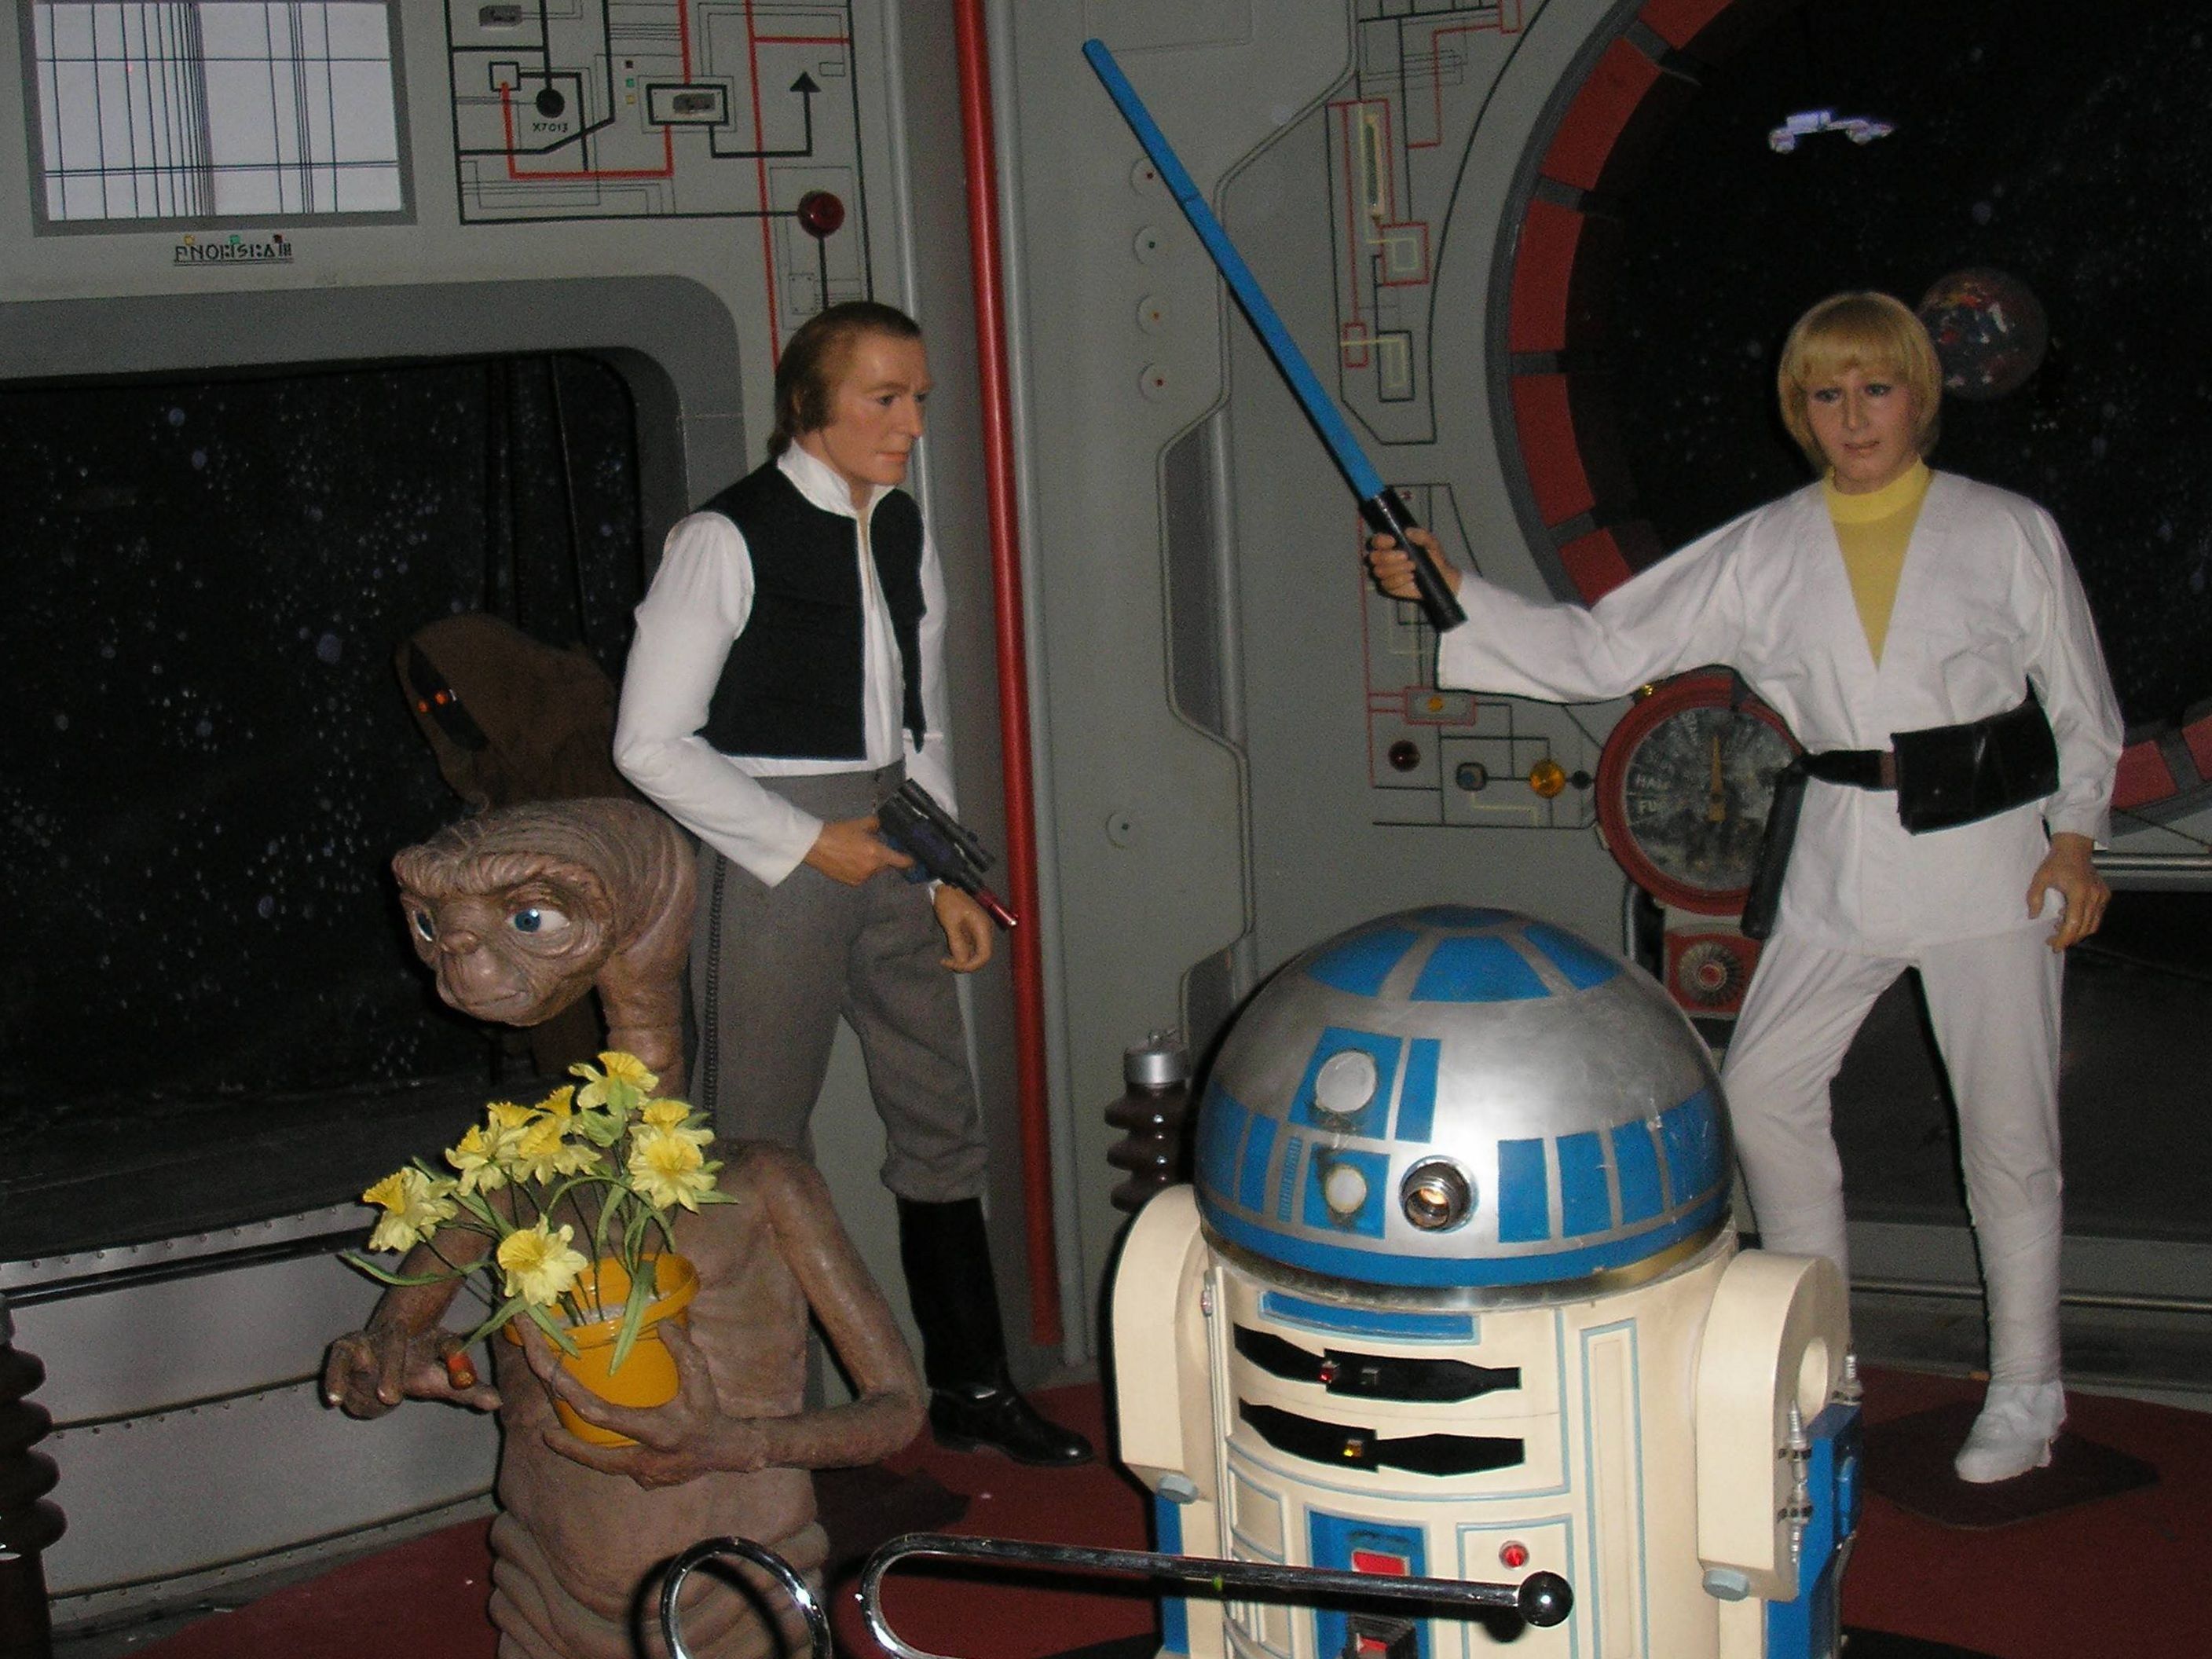 This Star Wars scene in a Spanish wax museum